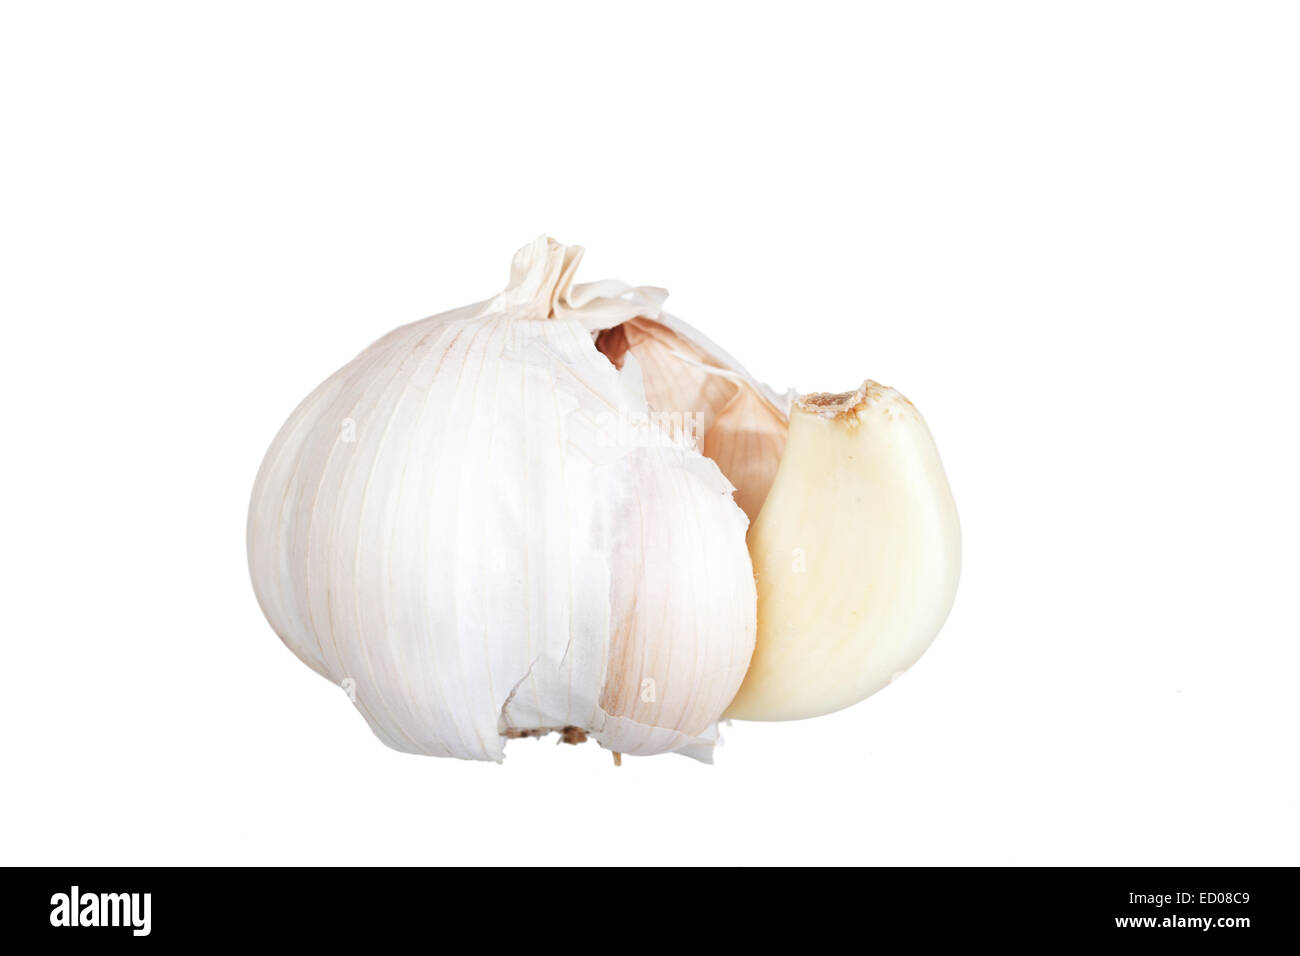 Garlic head on a white background, it is isolated Stock Photo